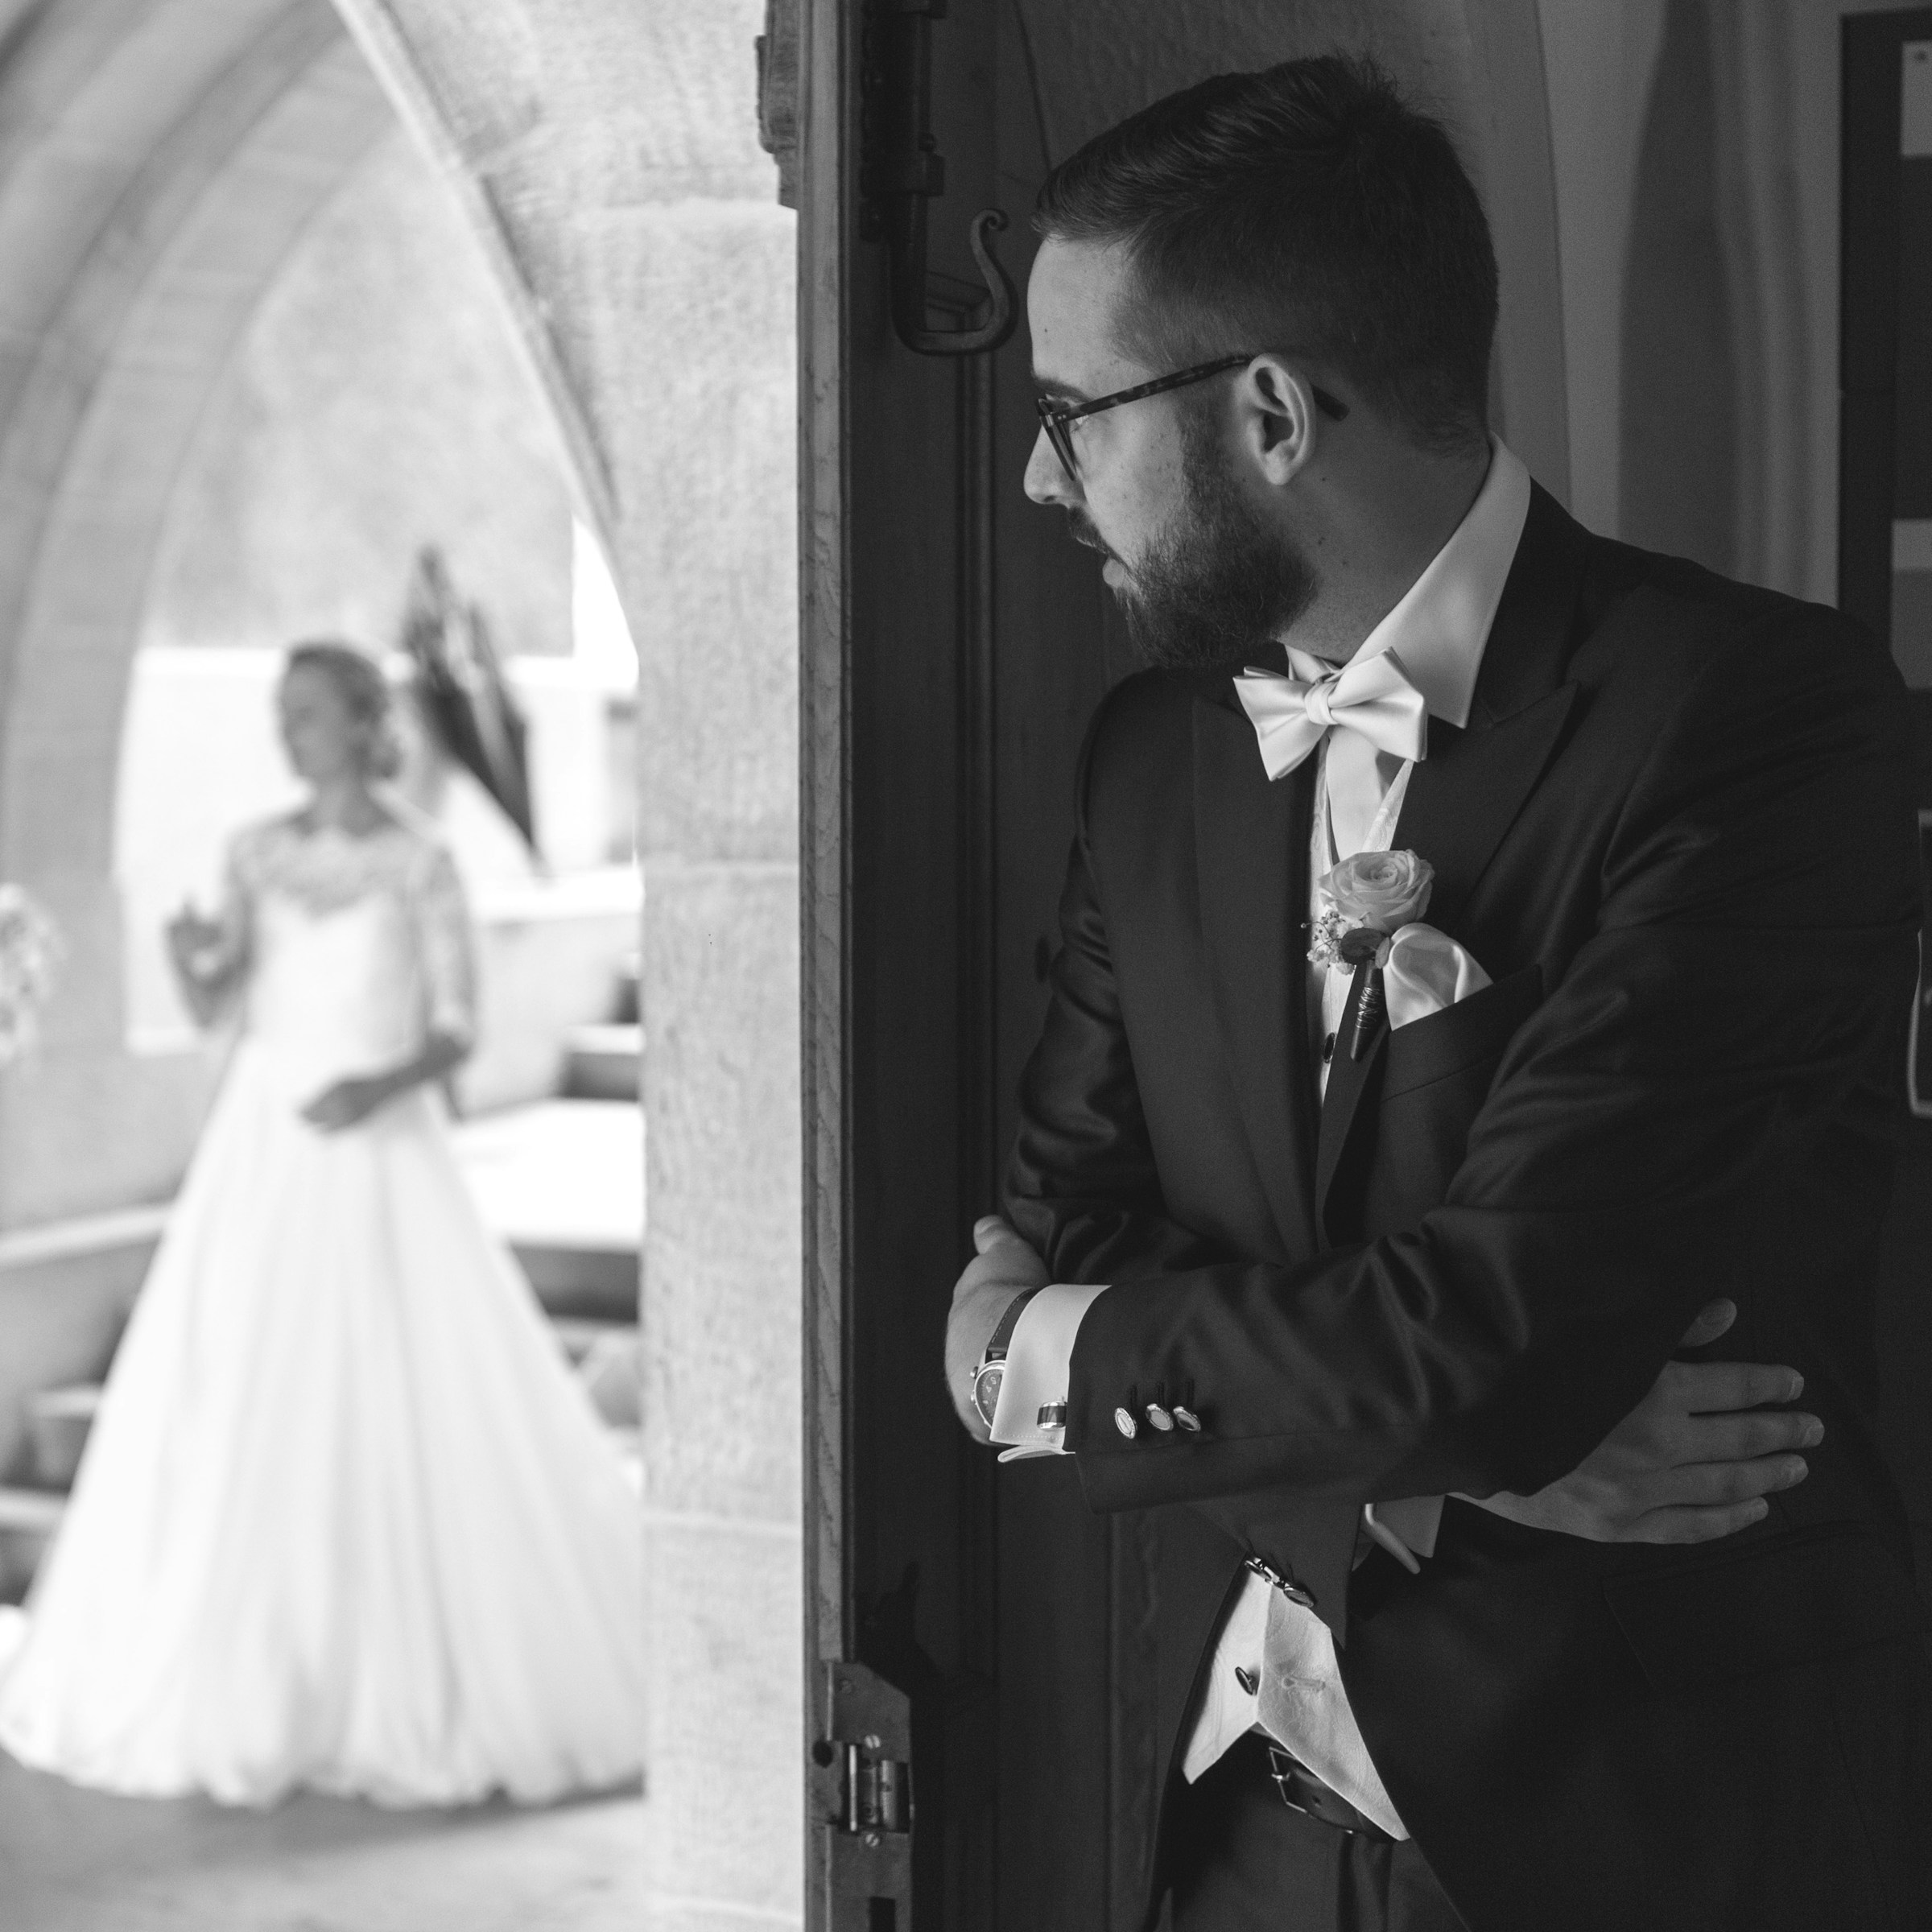 A man standing outside a church door and looking at the bride | Source: Unsplash